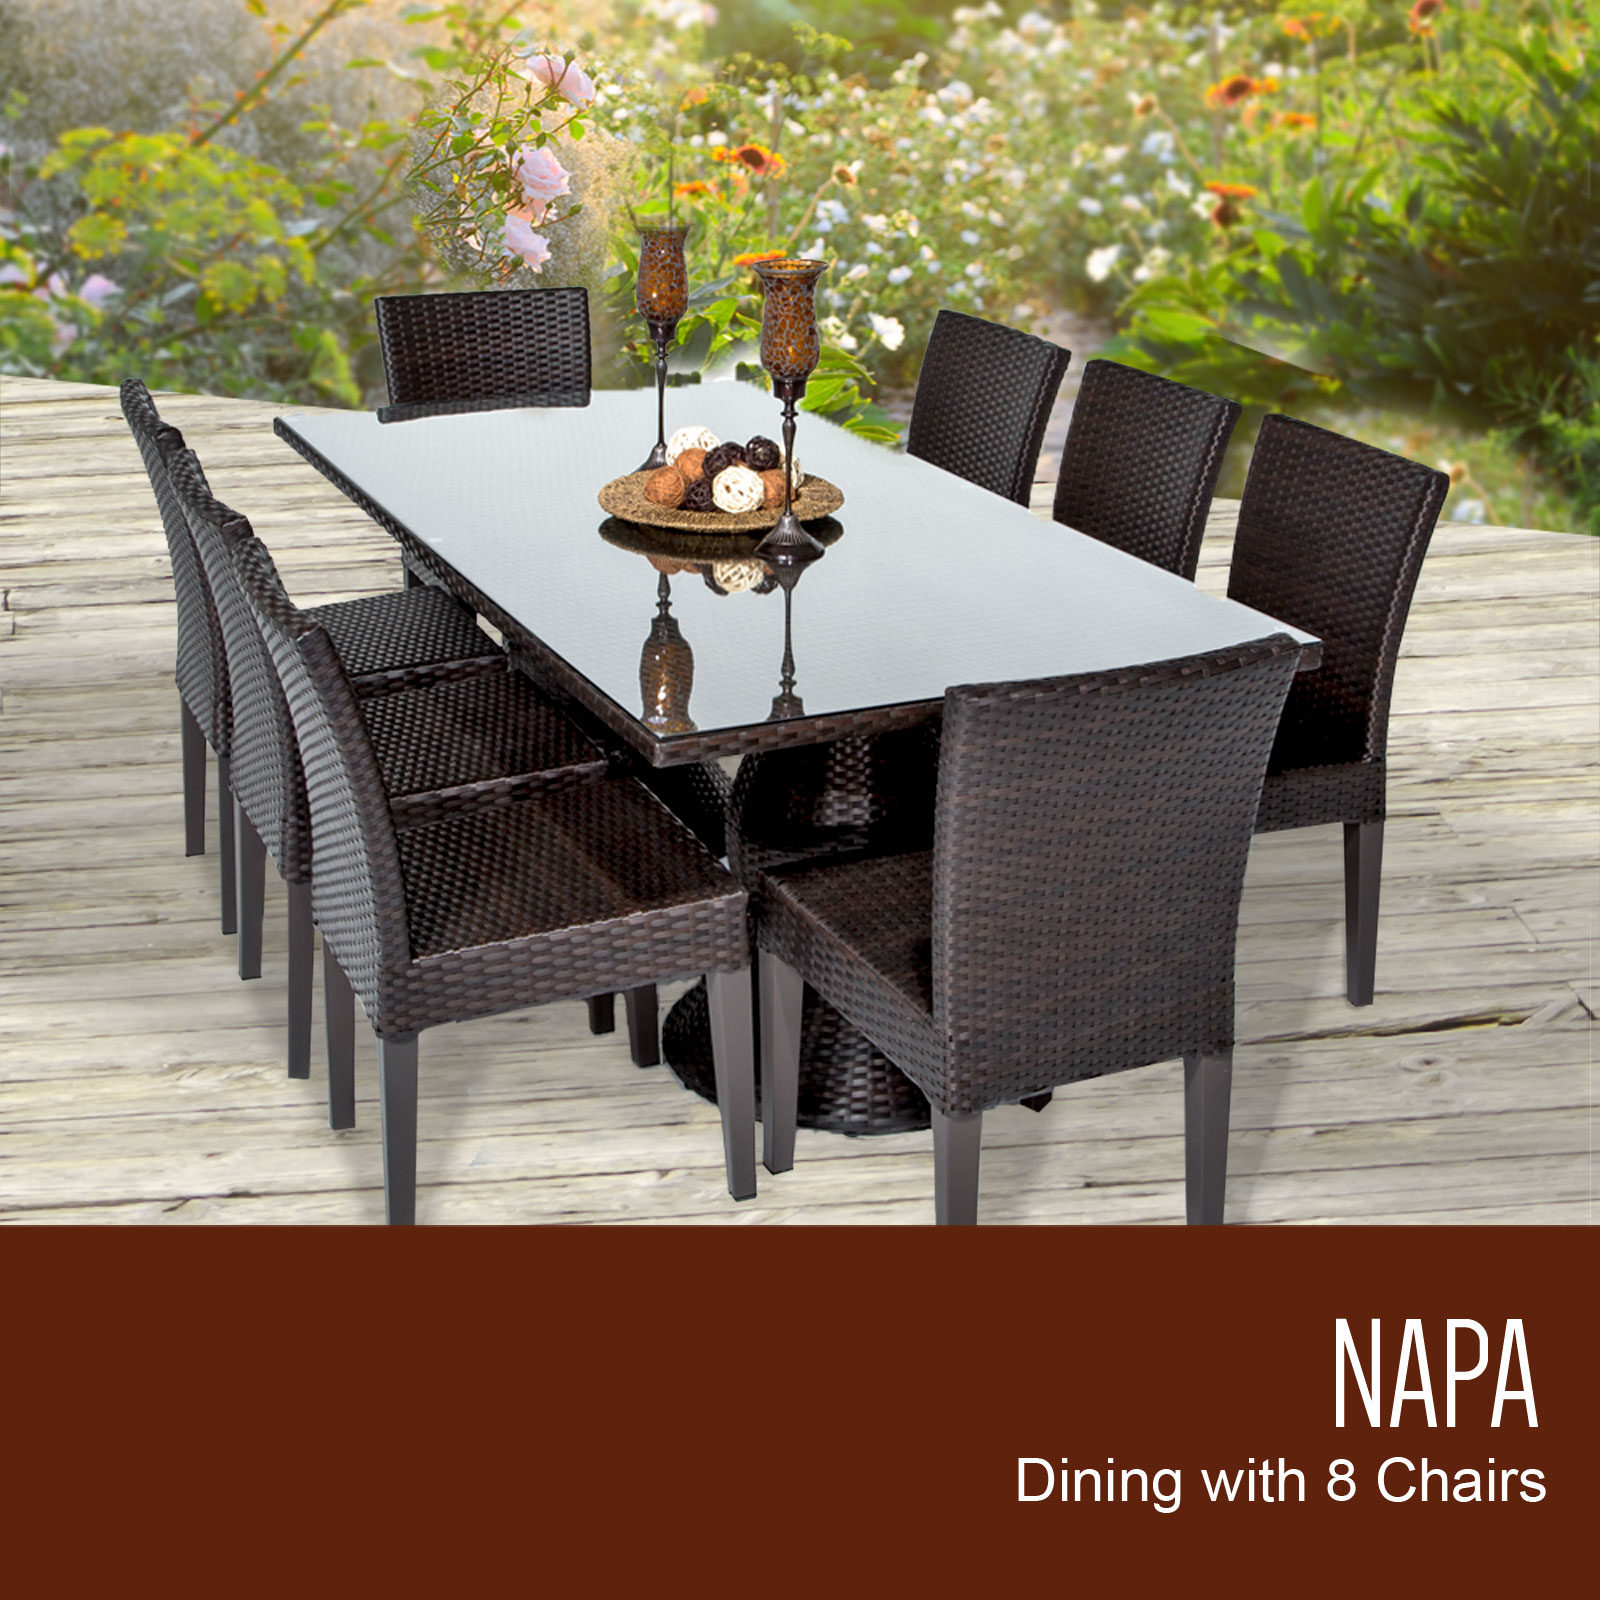 Napa Rectangular Outdoor Patio Dining Table with 8 Armless Chairs